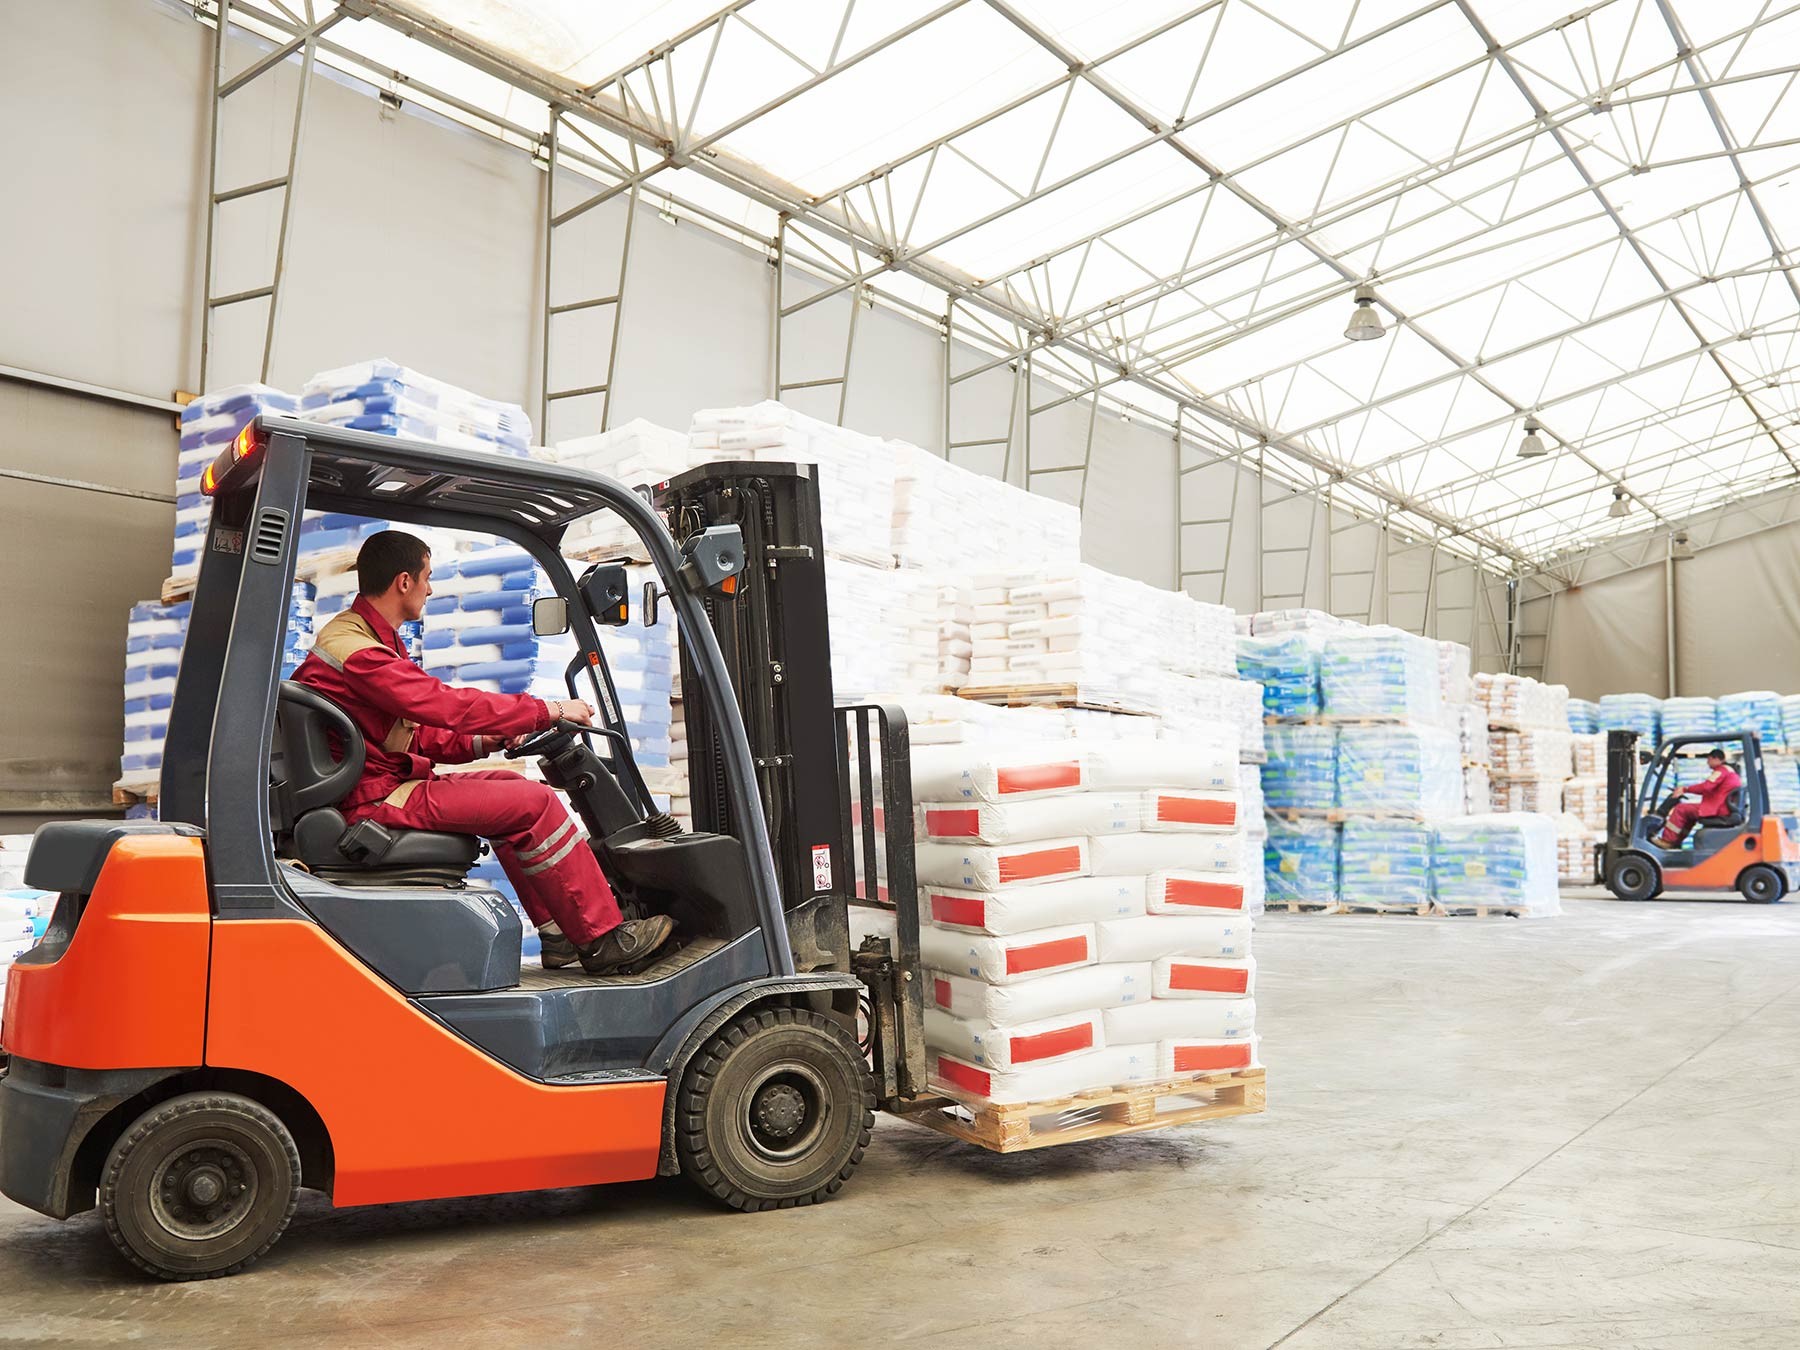 Forklift operating surface must be clean for safety reasons